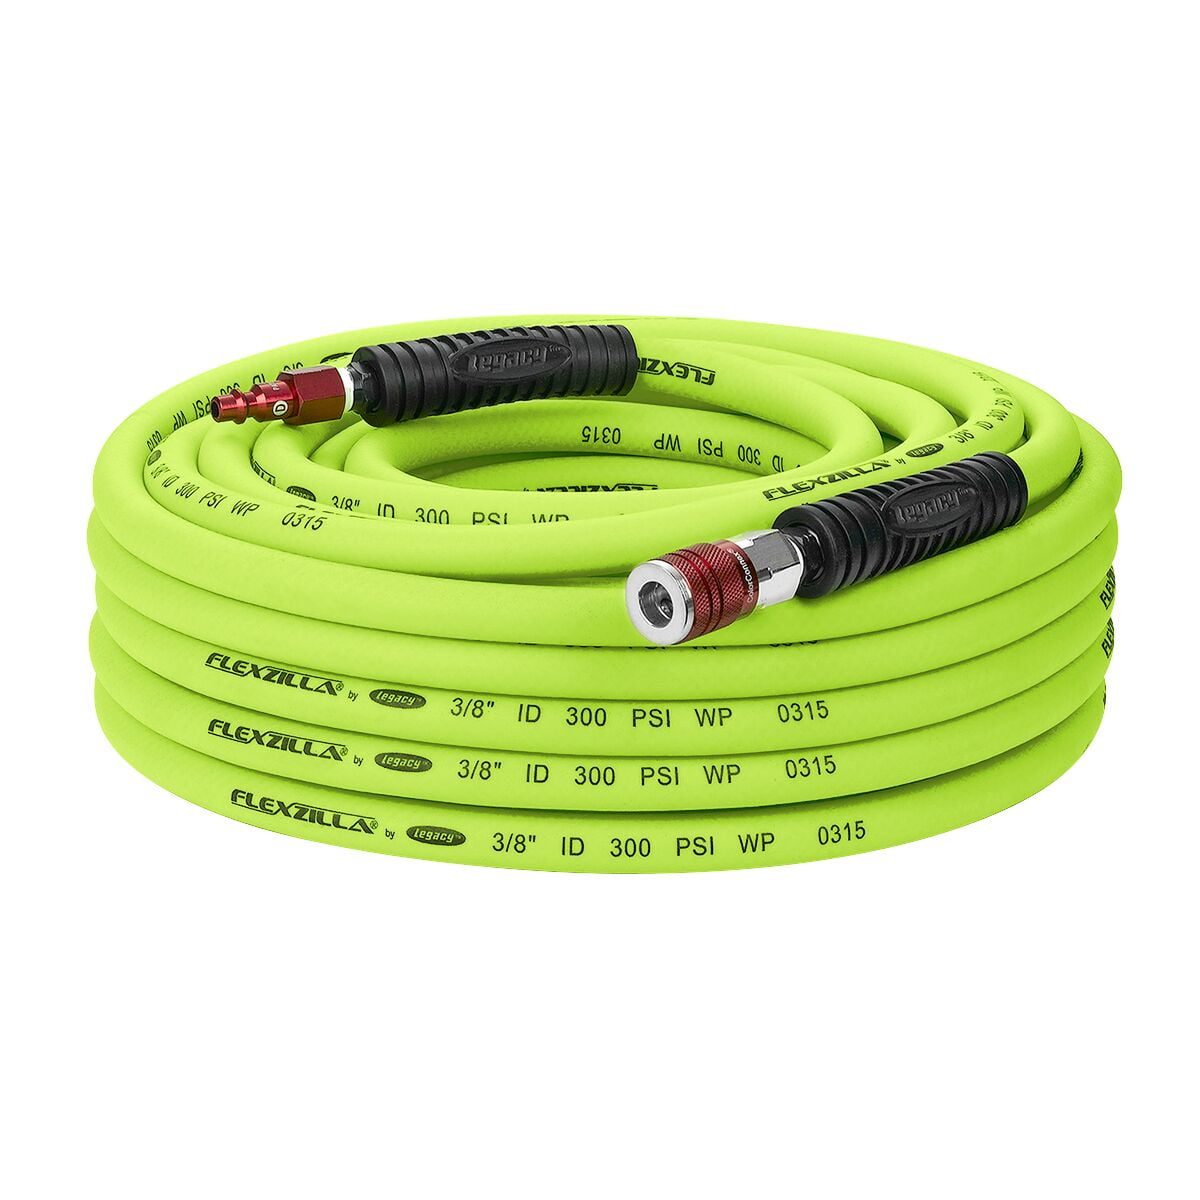 Flexzilla Air Hose w ColorConnex Industrial Type D Coupler and Plug-3/8" x 50'